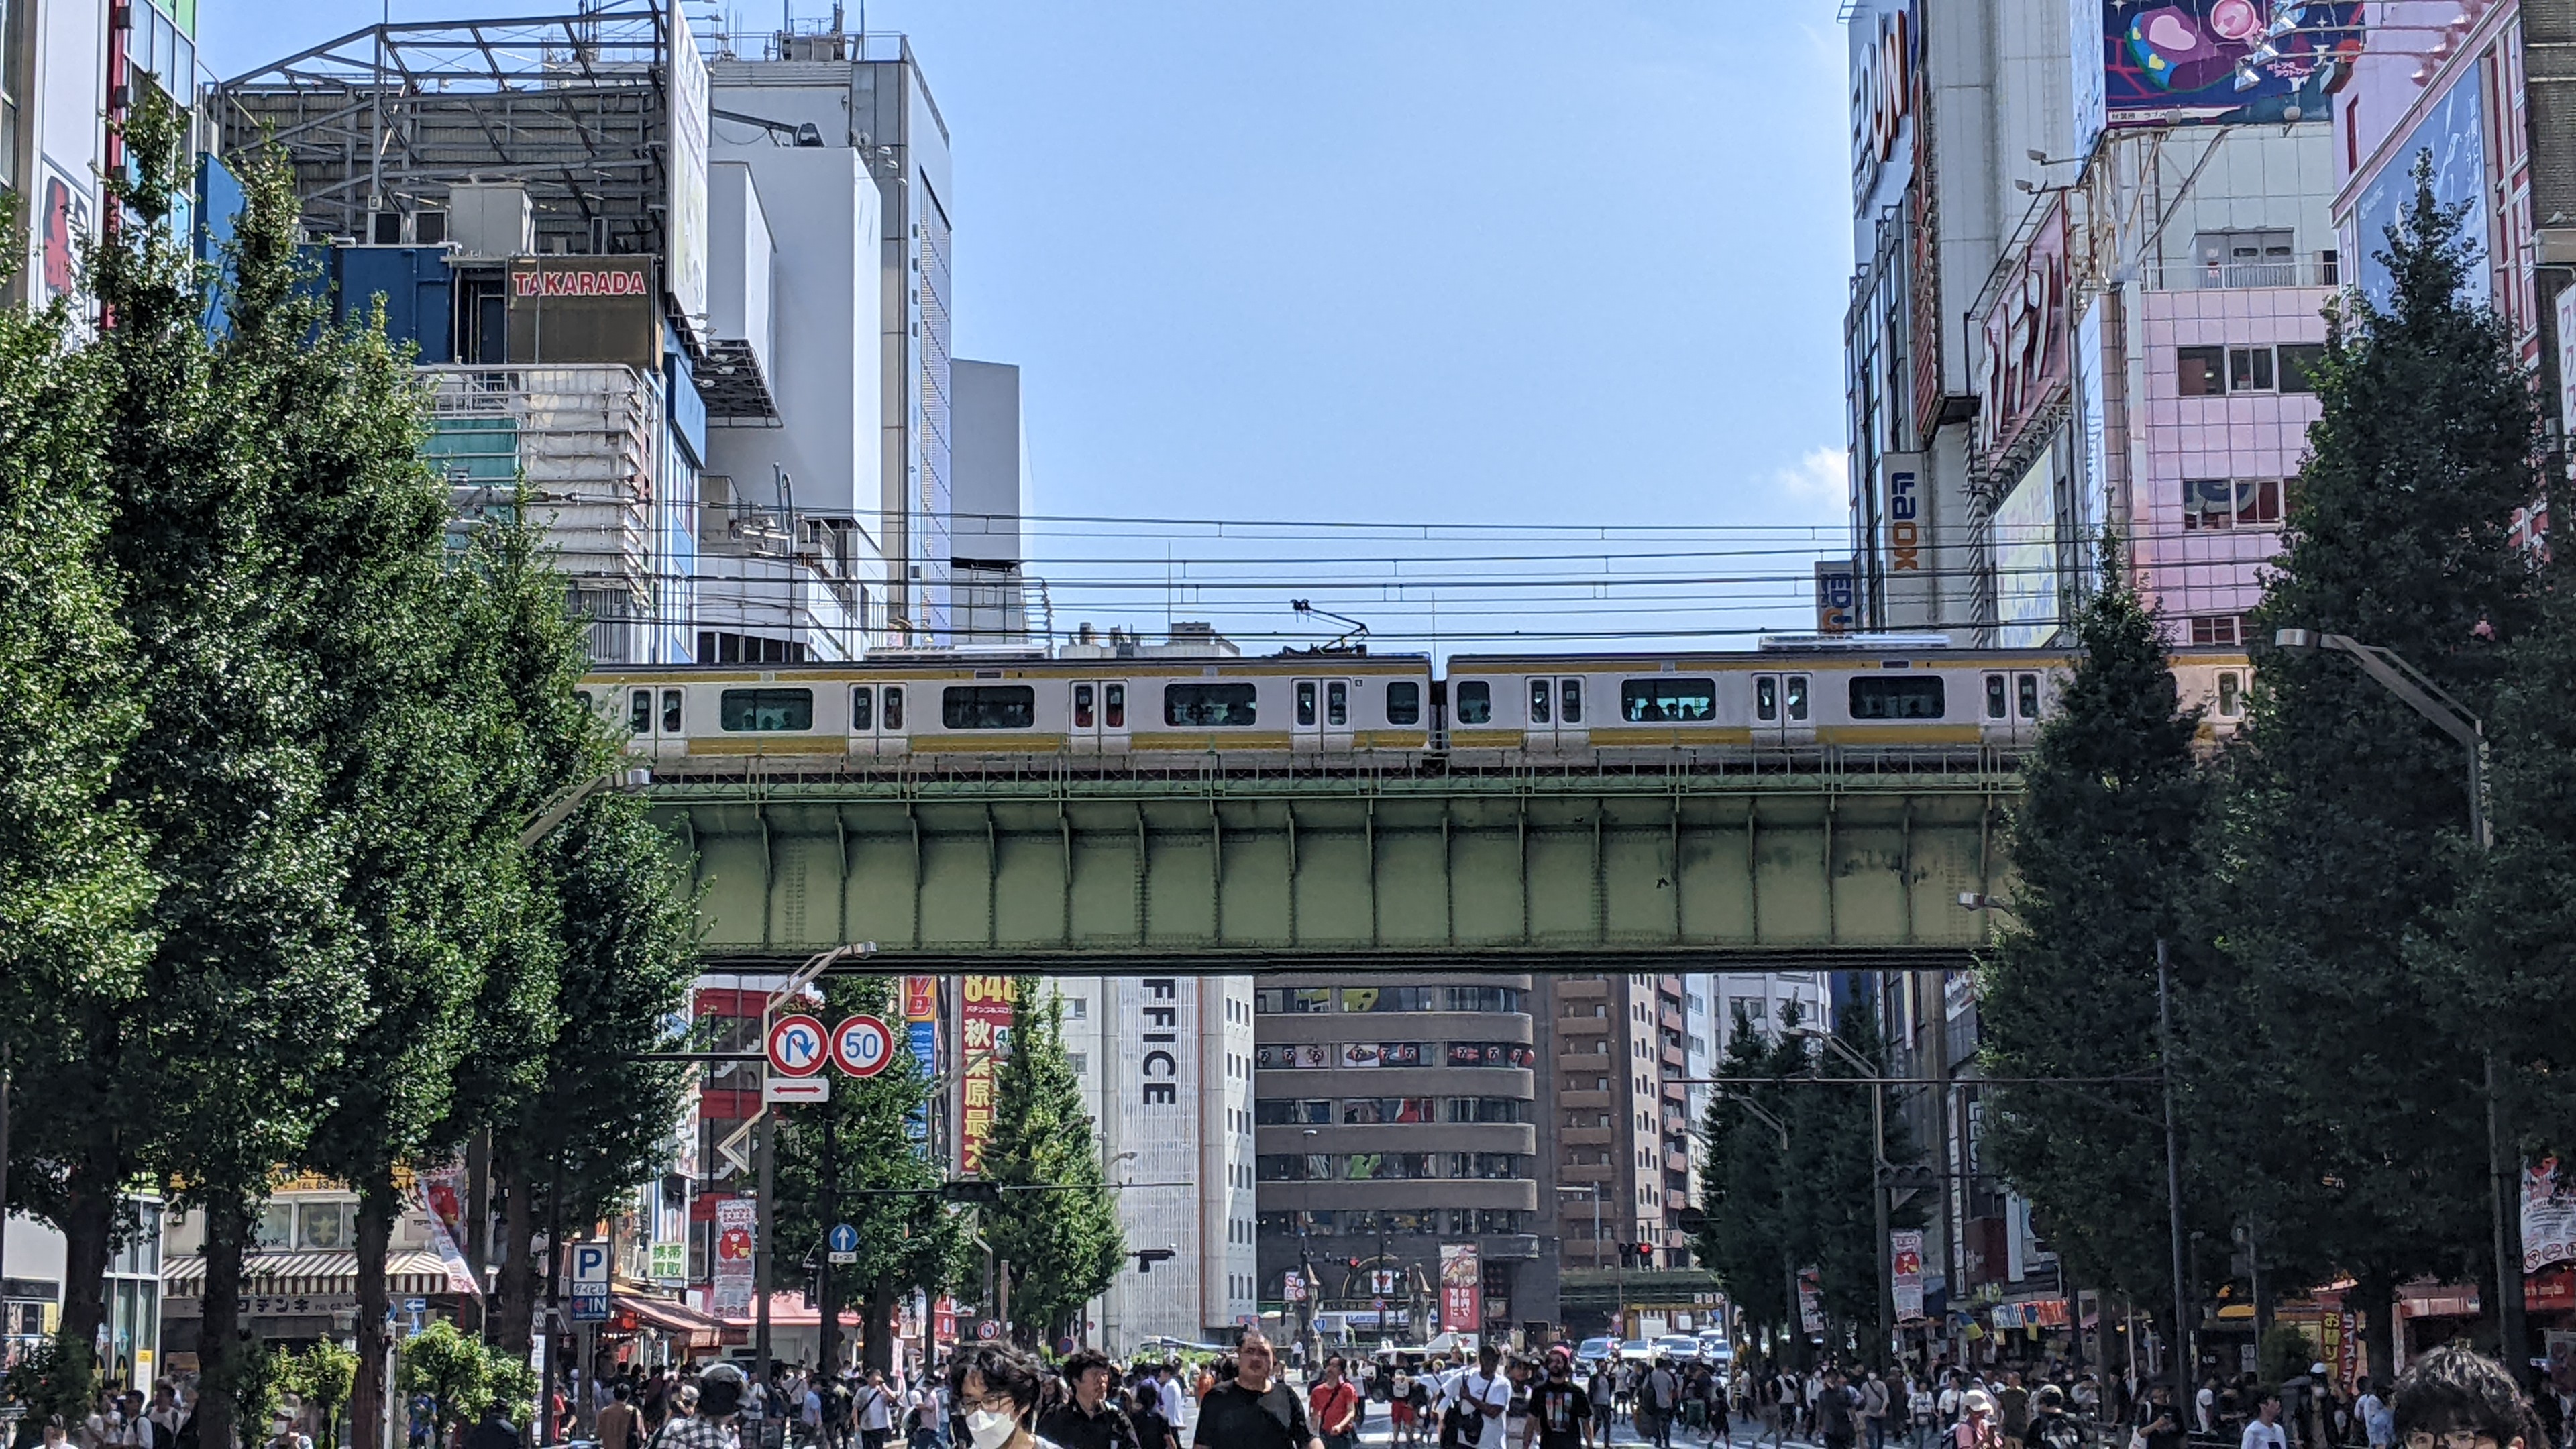 A train passing over the pedestrian-filled main street